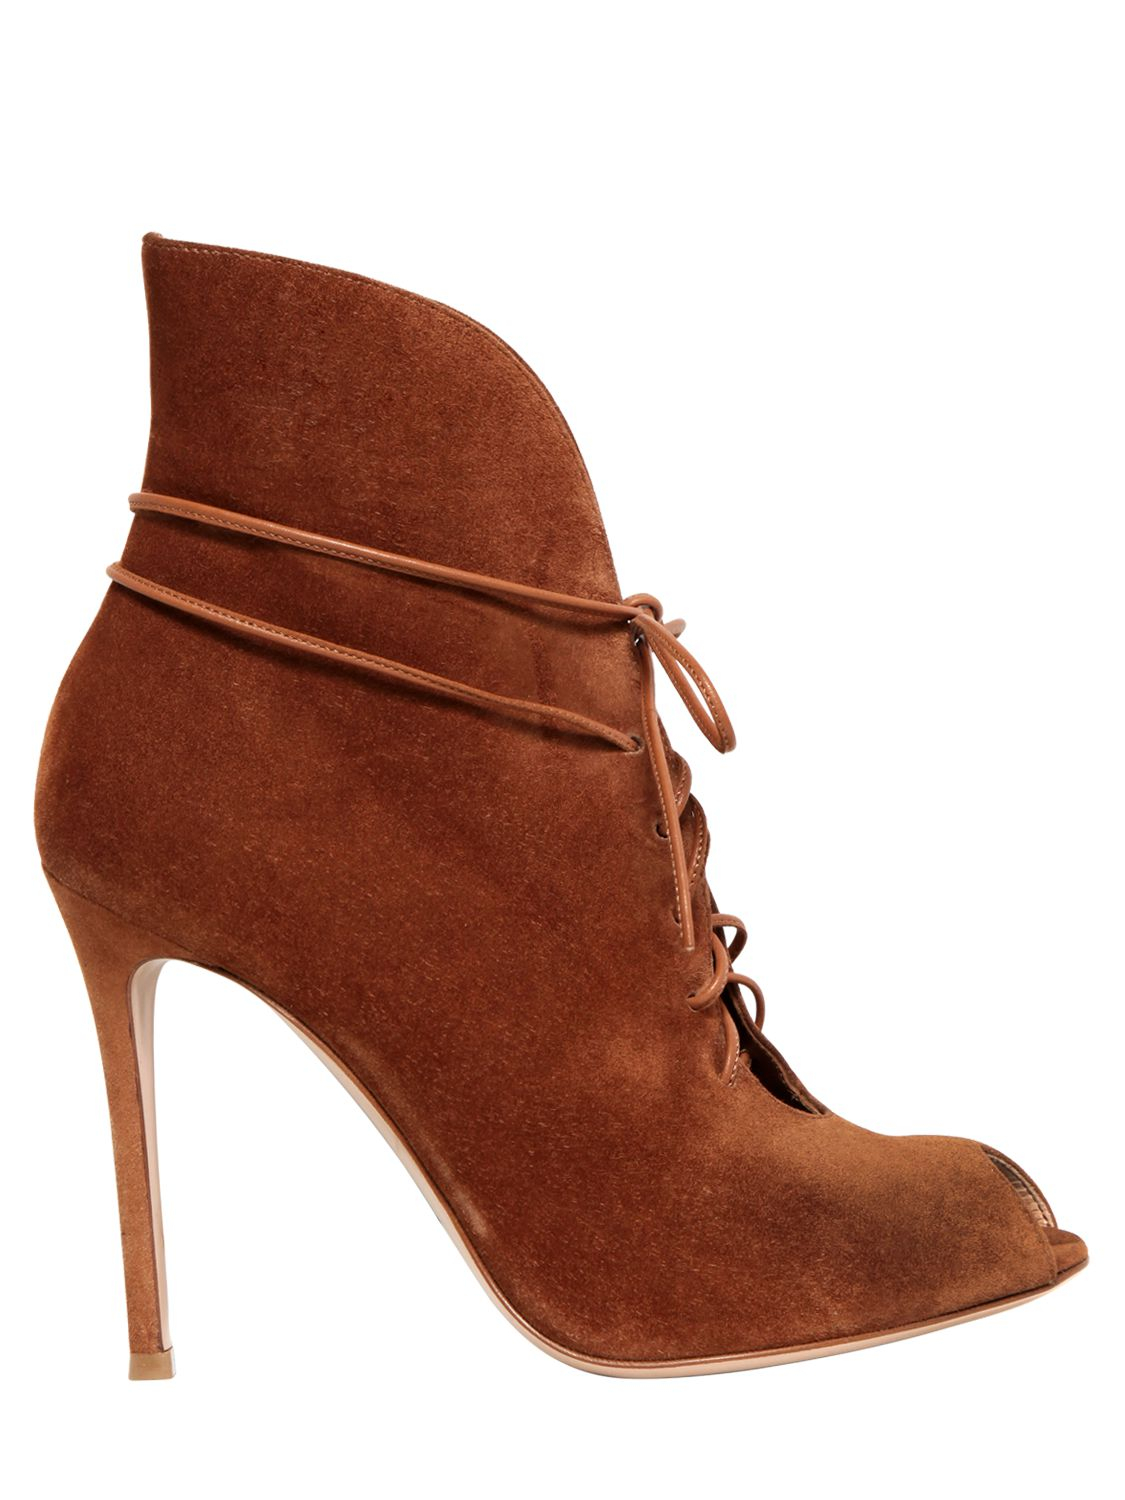 Lyst - Gianvito Rossi 100Mm Suede Open Toe Ankle Boots in Brown